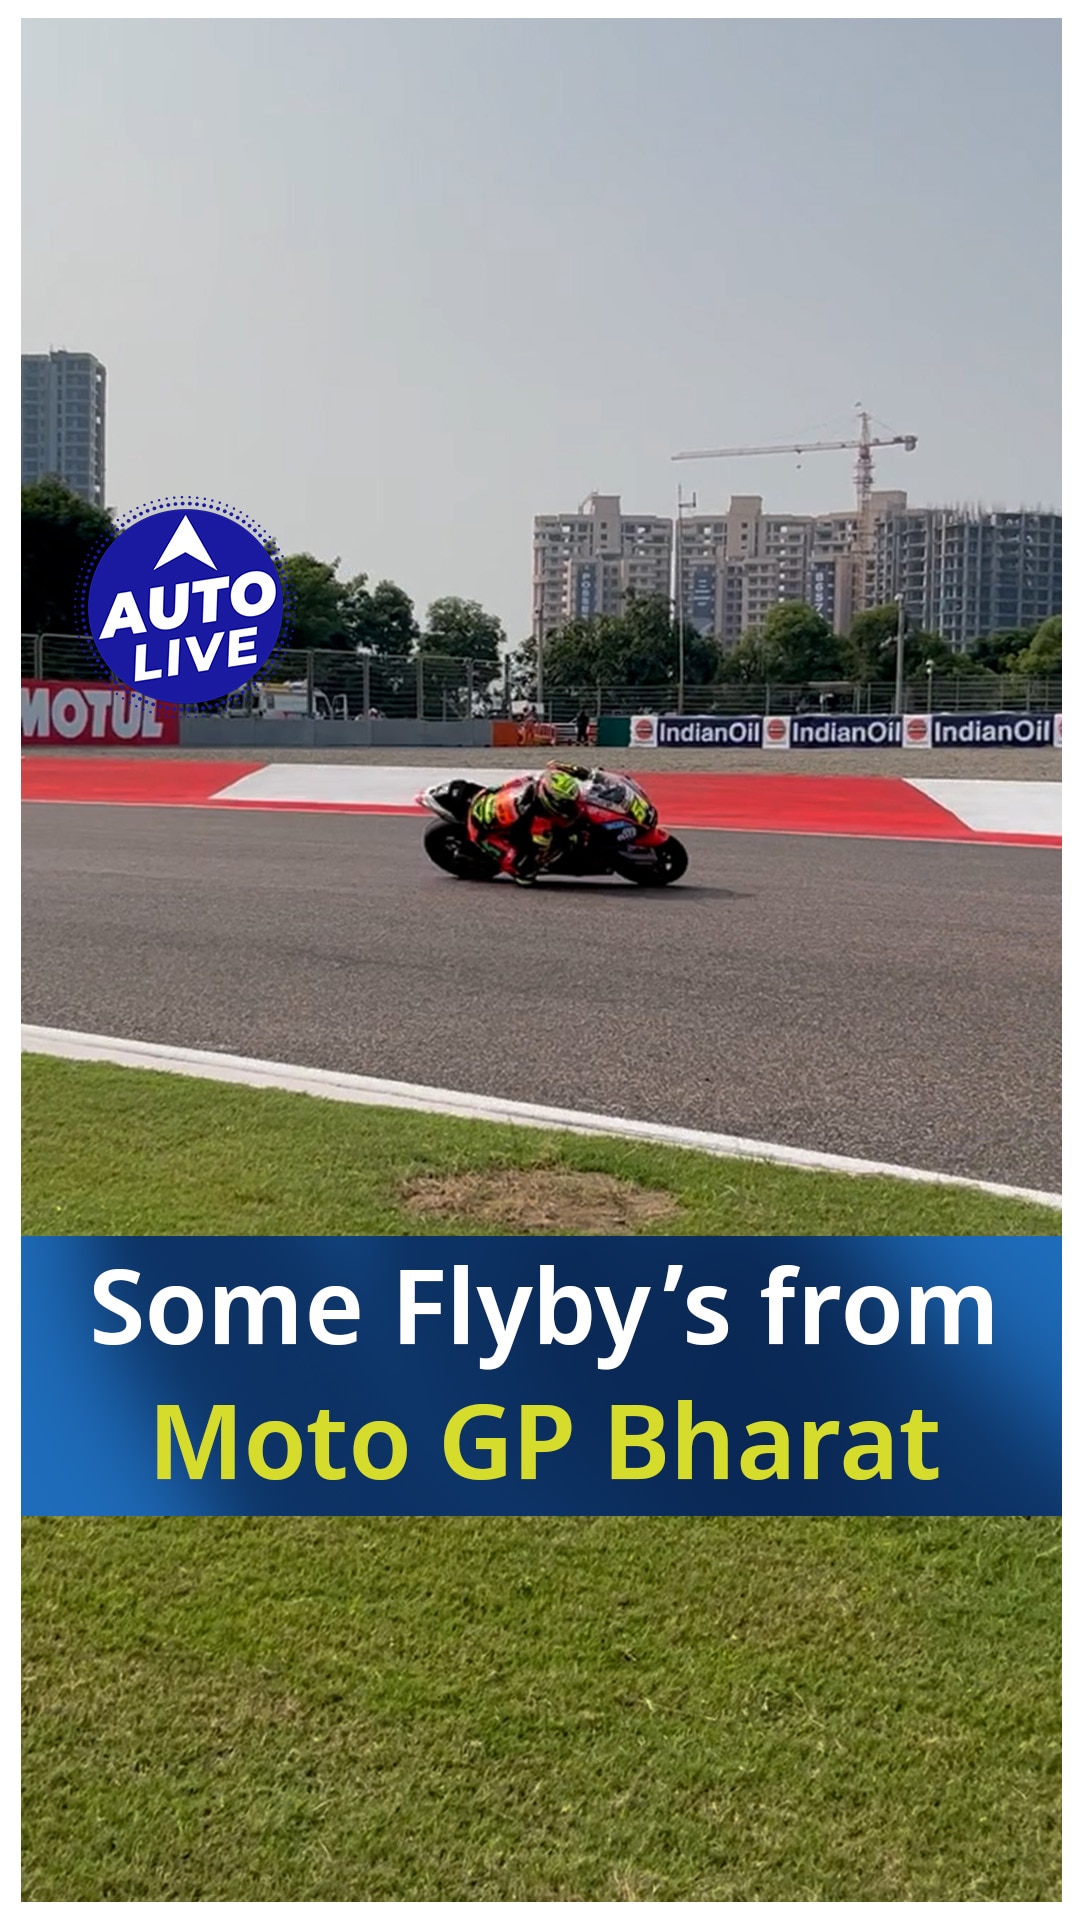 Some Flybys From Moto GP Bharat ! Auto Live Some Flybys From Moto GP Bharat Auto Live